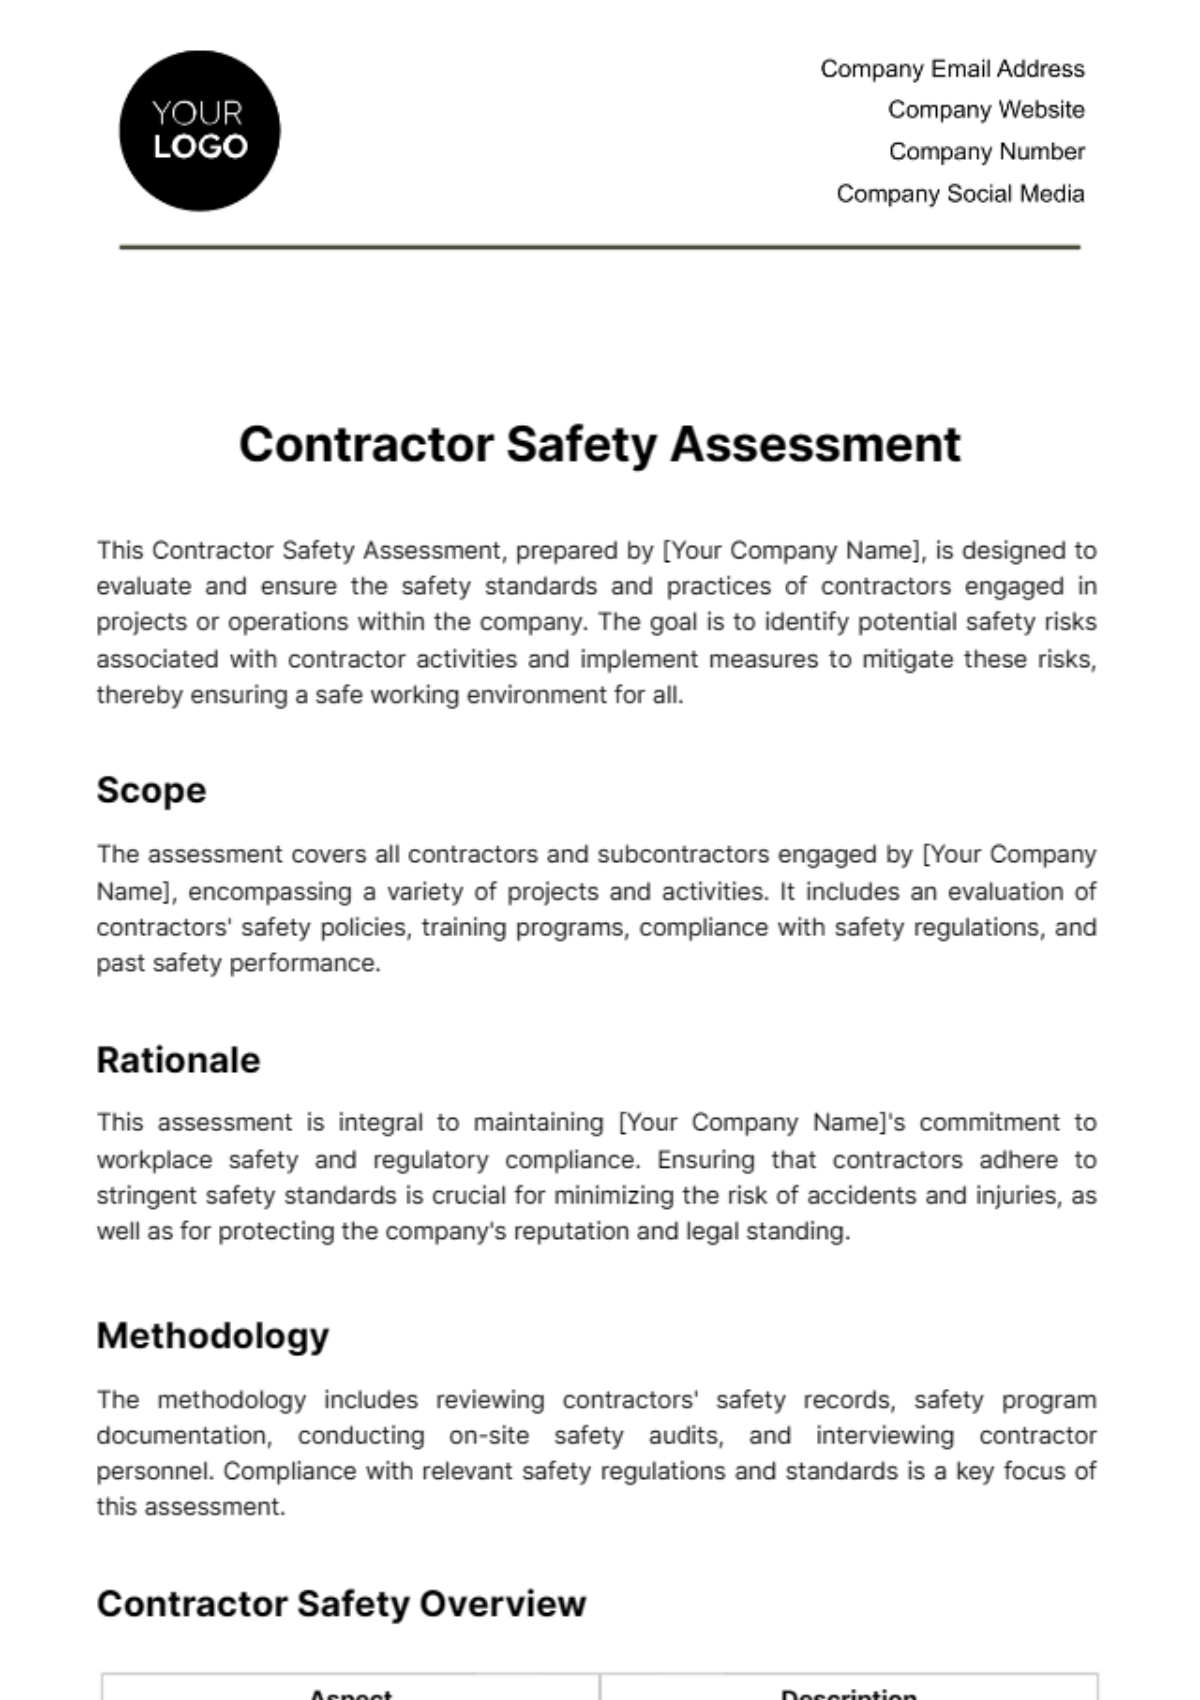 Free Contractor Safety Assessment Template